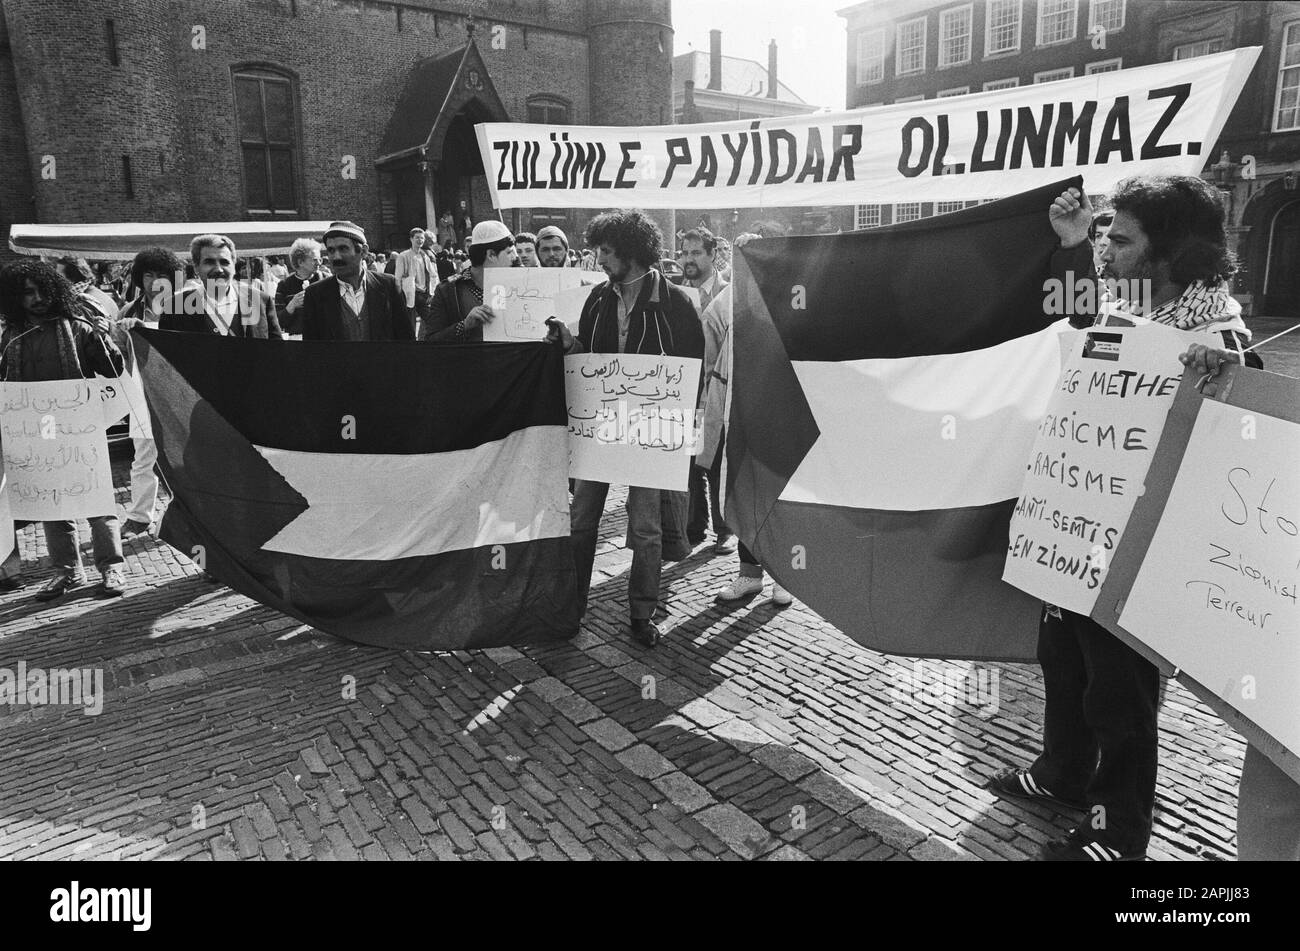 Demonstration at Binnenhof by Palestinian Association for cessation of murder Palestinian protesters Date: 16 april 1982 Location: Binnenhof, The Hague, Zuid-Holland Keywords: Demonstration, KILLINGER, protesters Stock Photo